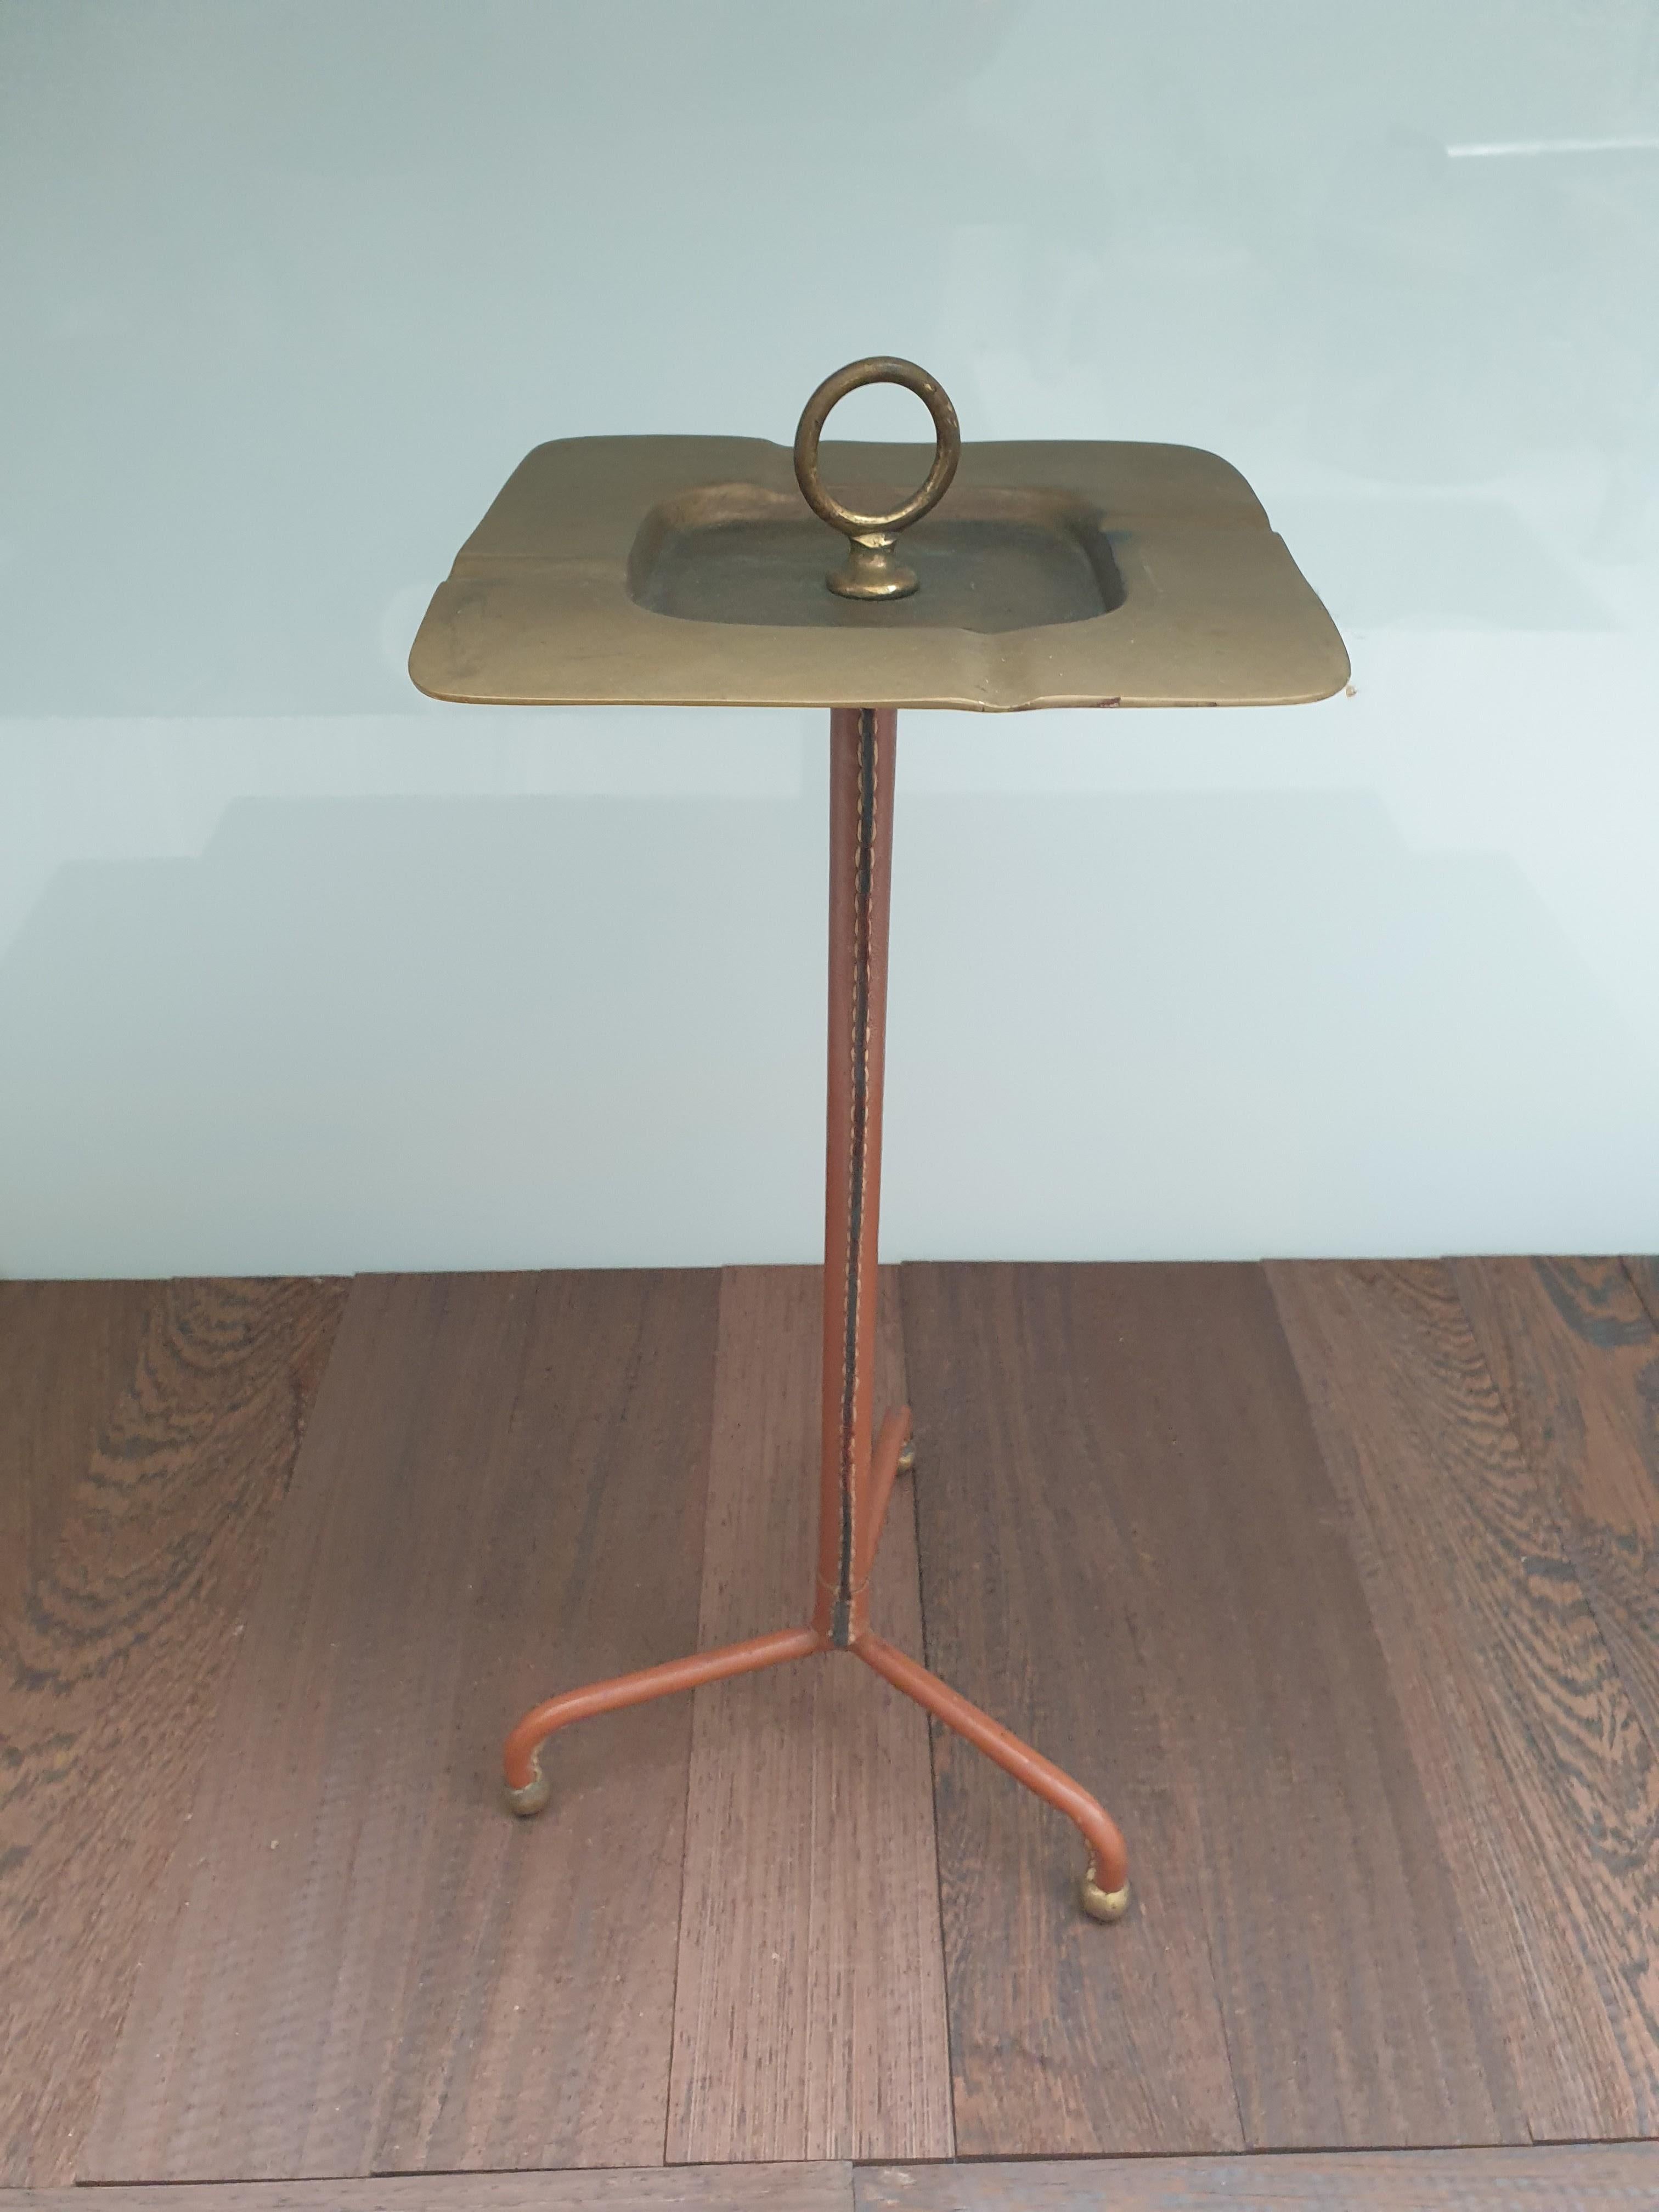 Elegant standing ashtray in stitched brown leather by Jacques Adnet. The brass ashtray has its original patination as do the gilt metal feet. The leather is in good original condition.